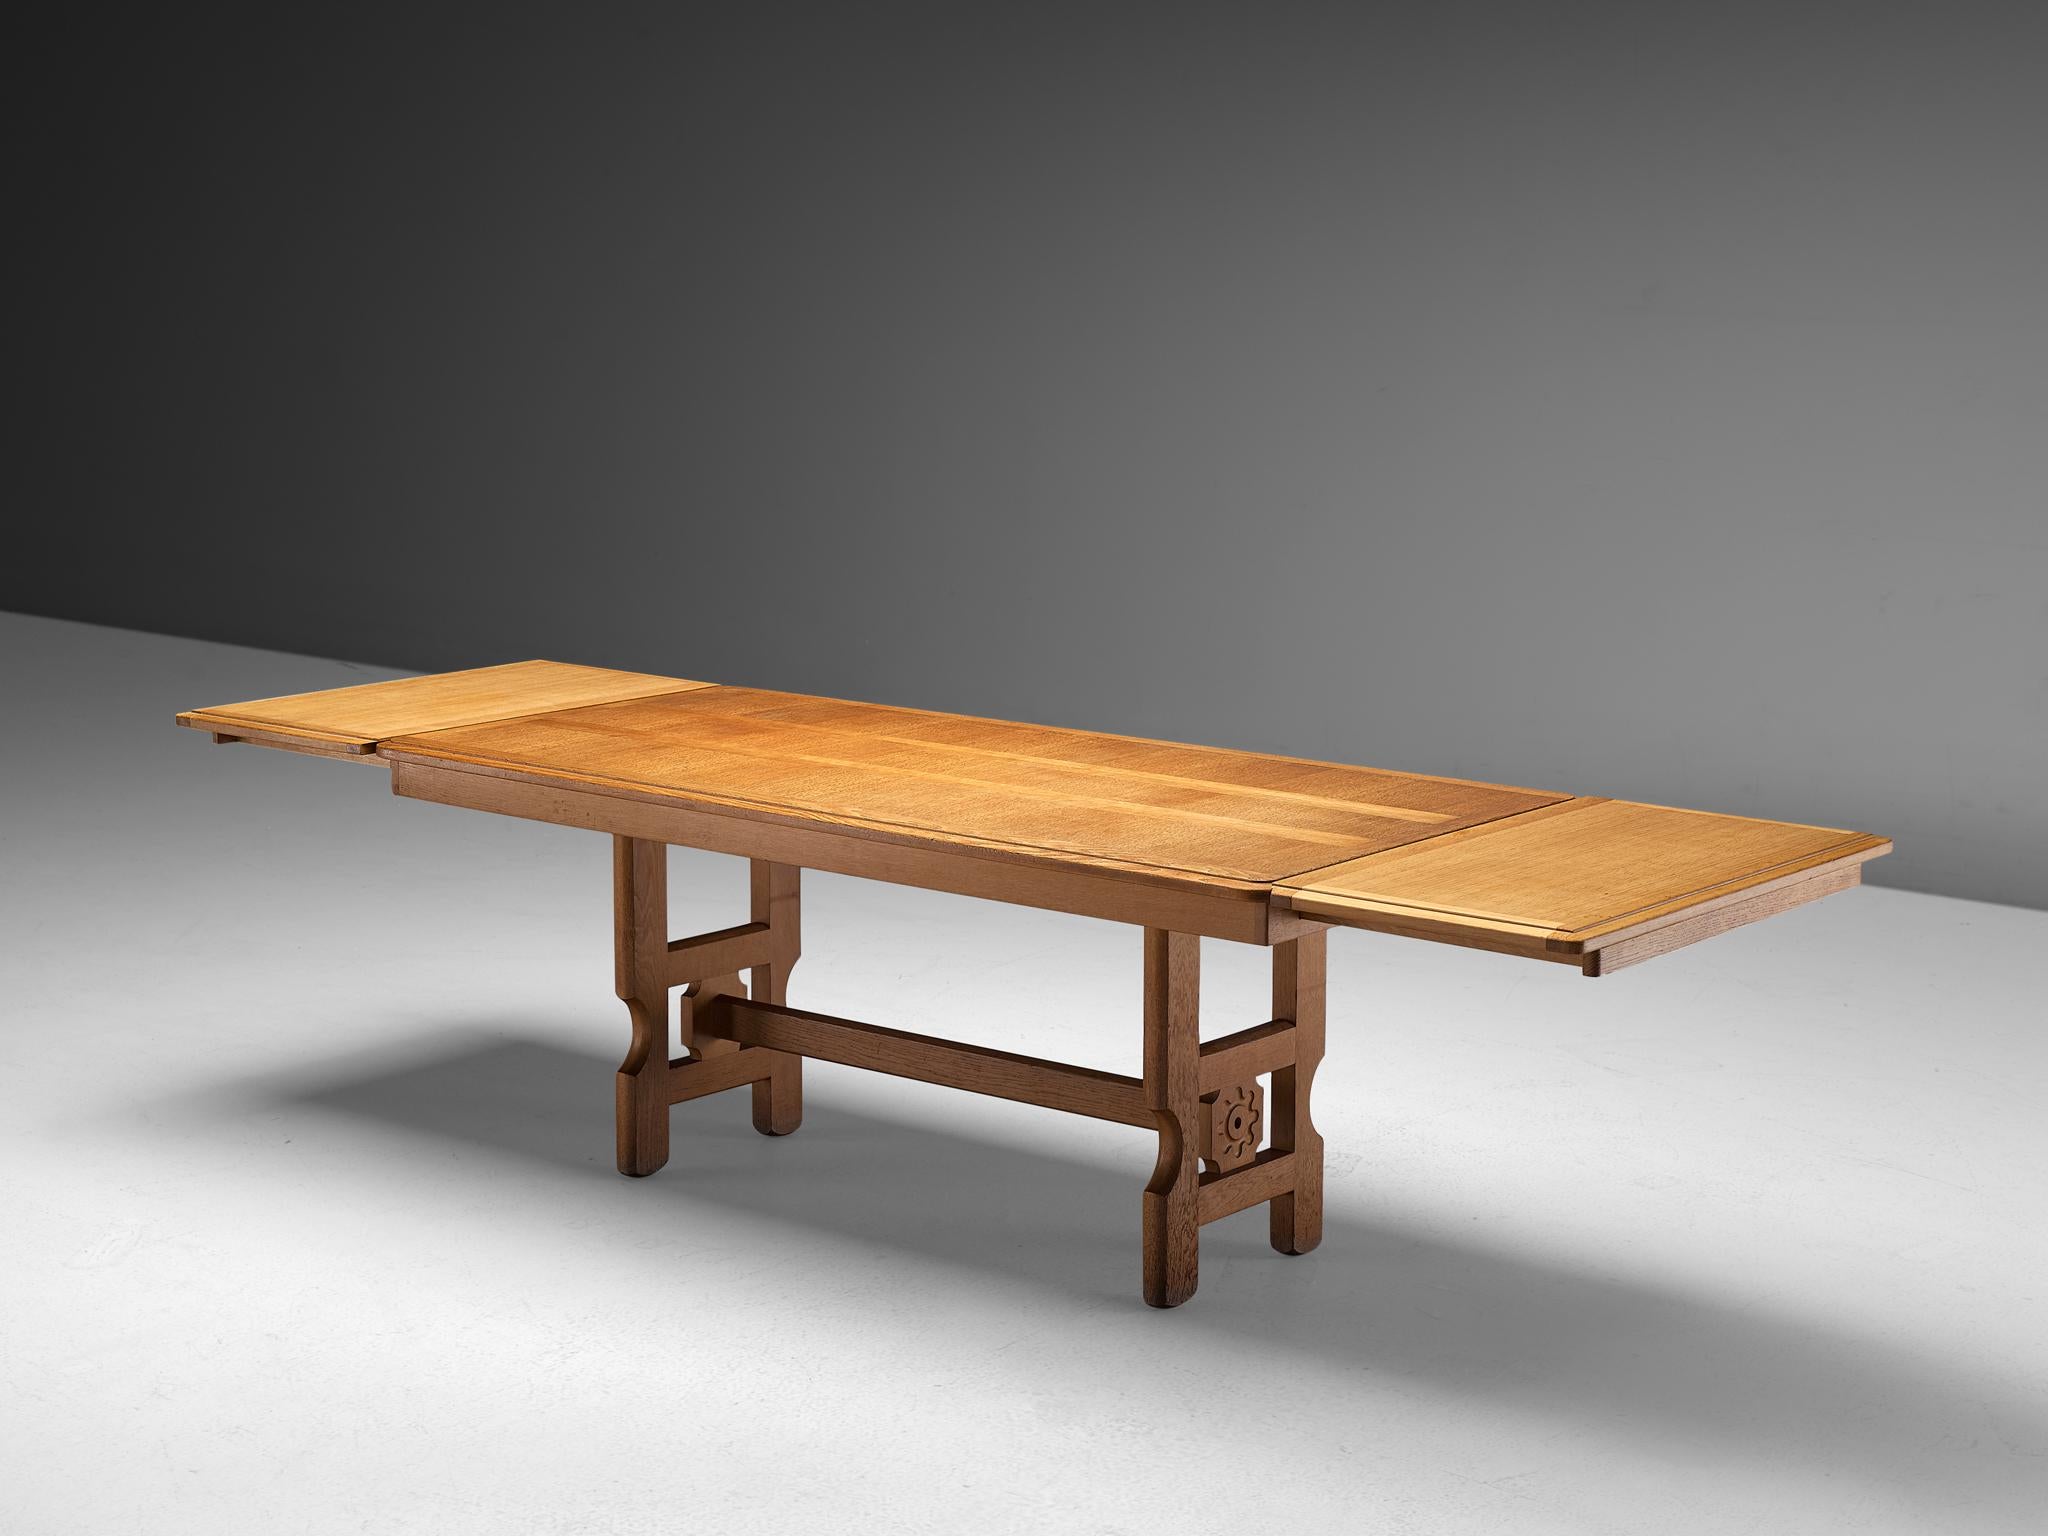 Guillerme et Chambron, dining table, oak, France, 1960s.

Extendable dining table in solid oak by French designers Guillerme et Chambron. This elegant table shows interesting details. Most attractive is the stunning sculpted legs that show beautiful